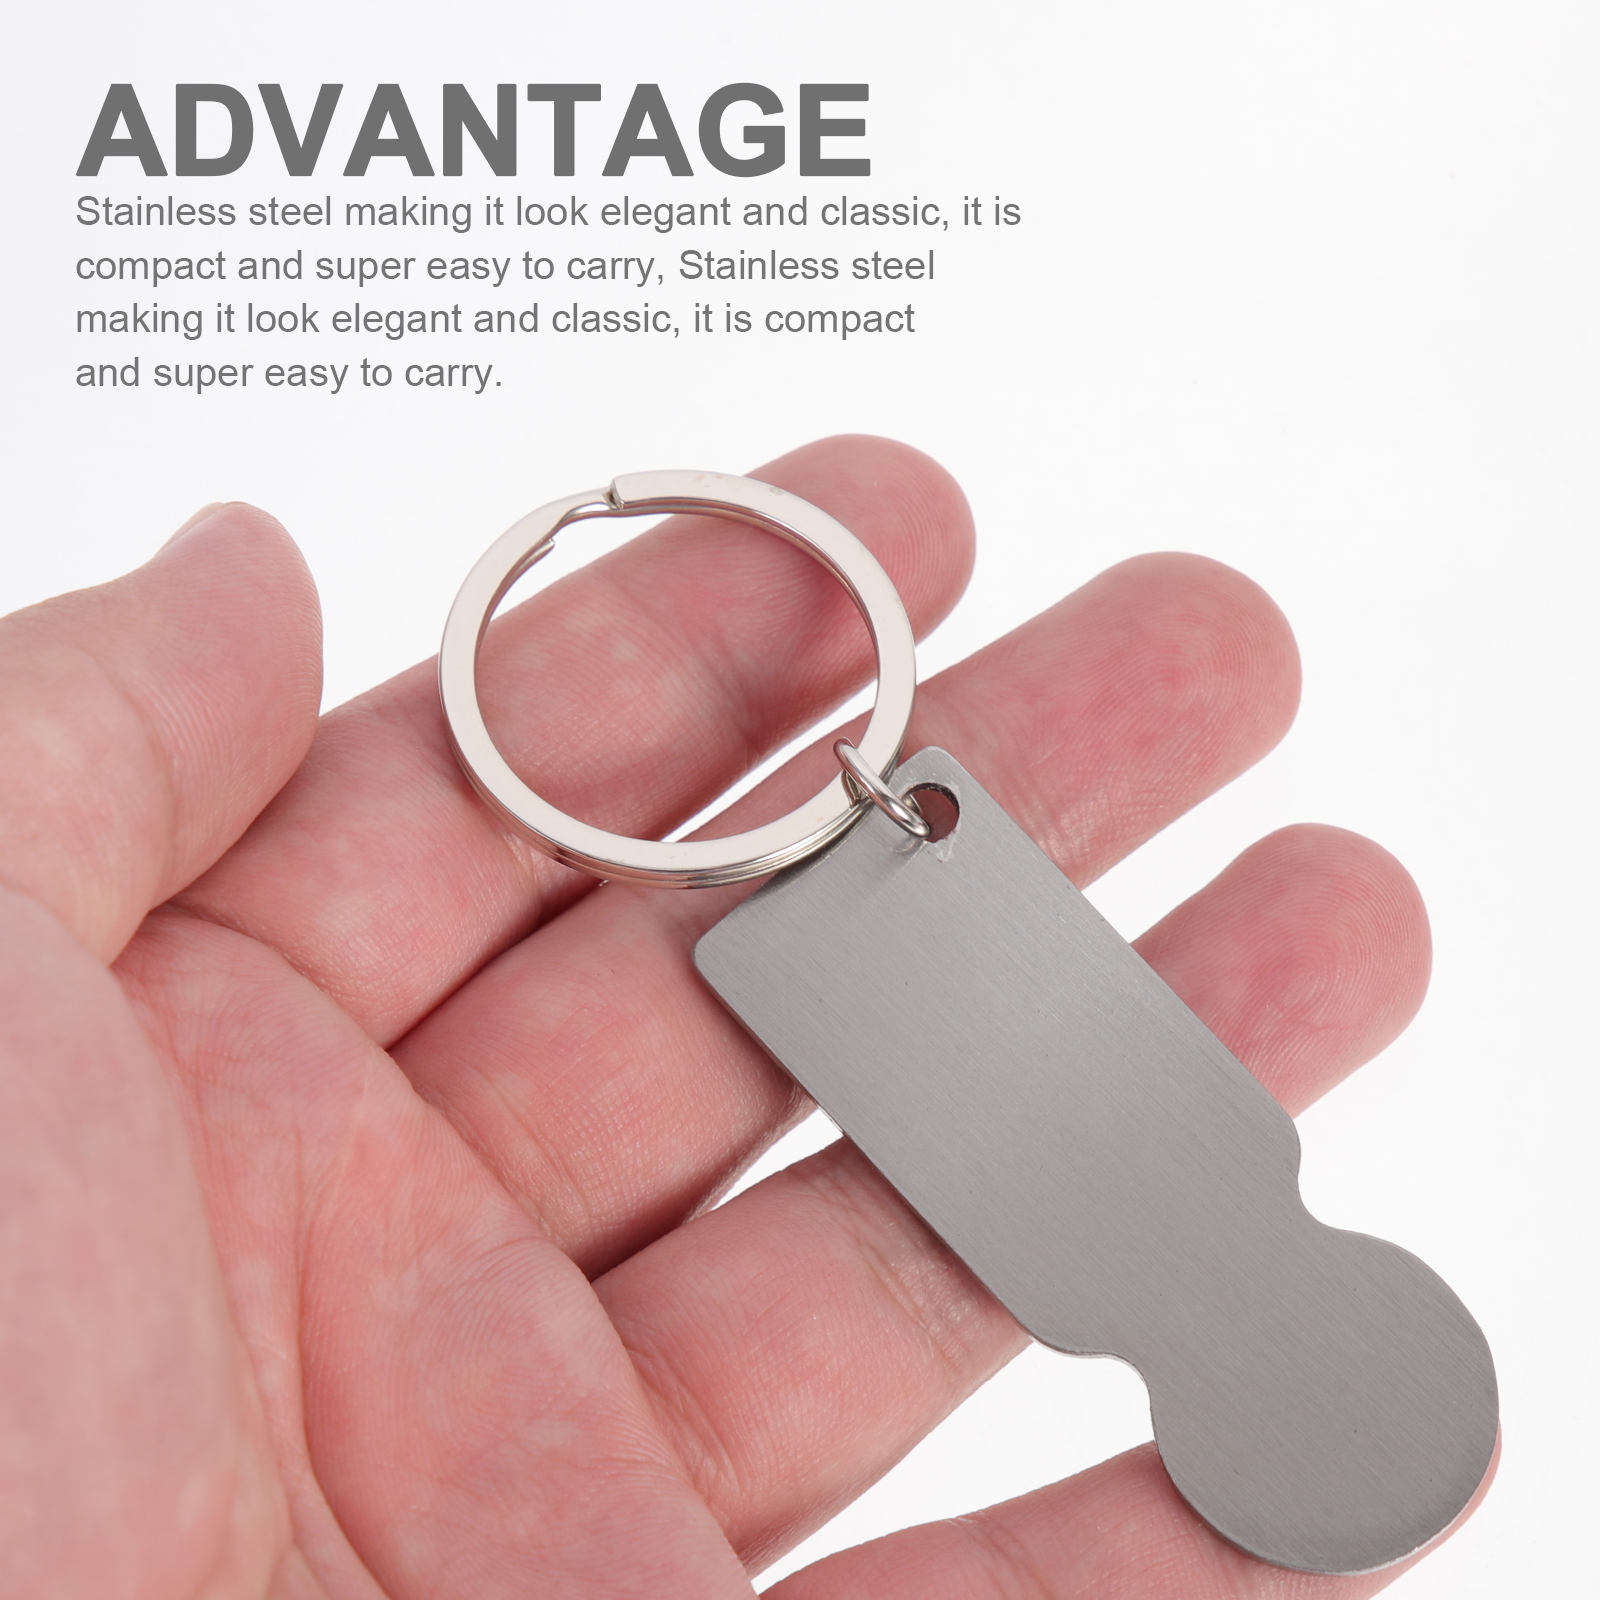 Cart Token Metal Wallets Blank Keychains Shopping Accessory Portable Wagon  Grocery Trolley Keyring Small Change Purse 